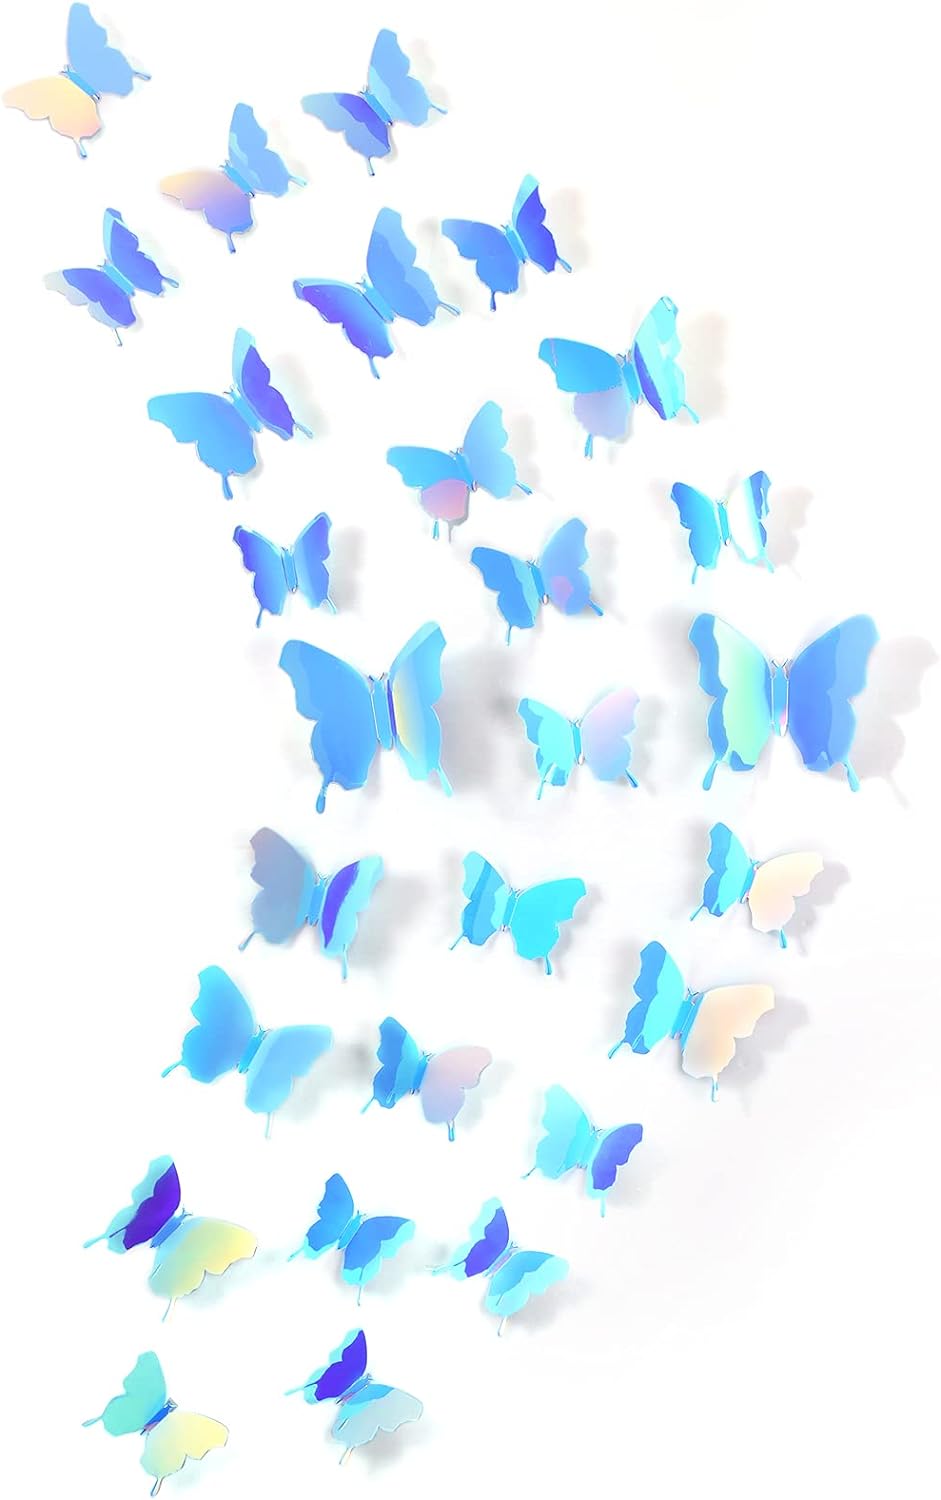 48 Pieces Butterfly Wall Decor DIY Mirror 3D Butterfly Stickers Removable Butterfly Decals for Home Nursery Classroom Kids Bedroom Bathroom Living Room Decor (Blue)